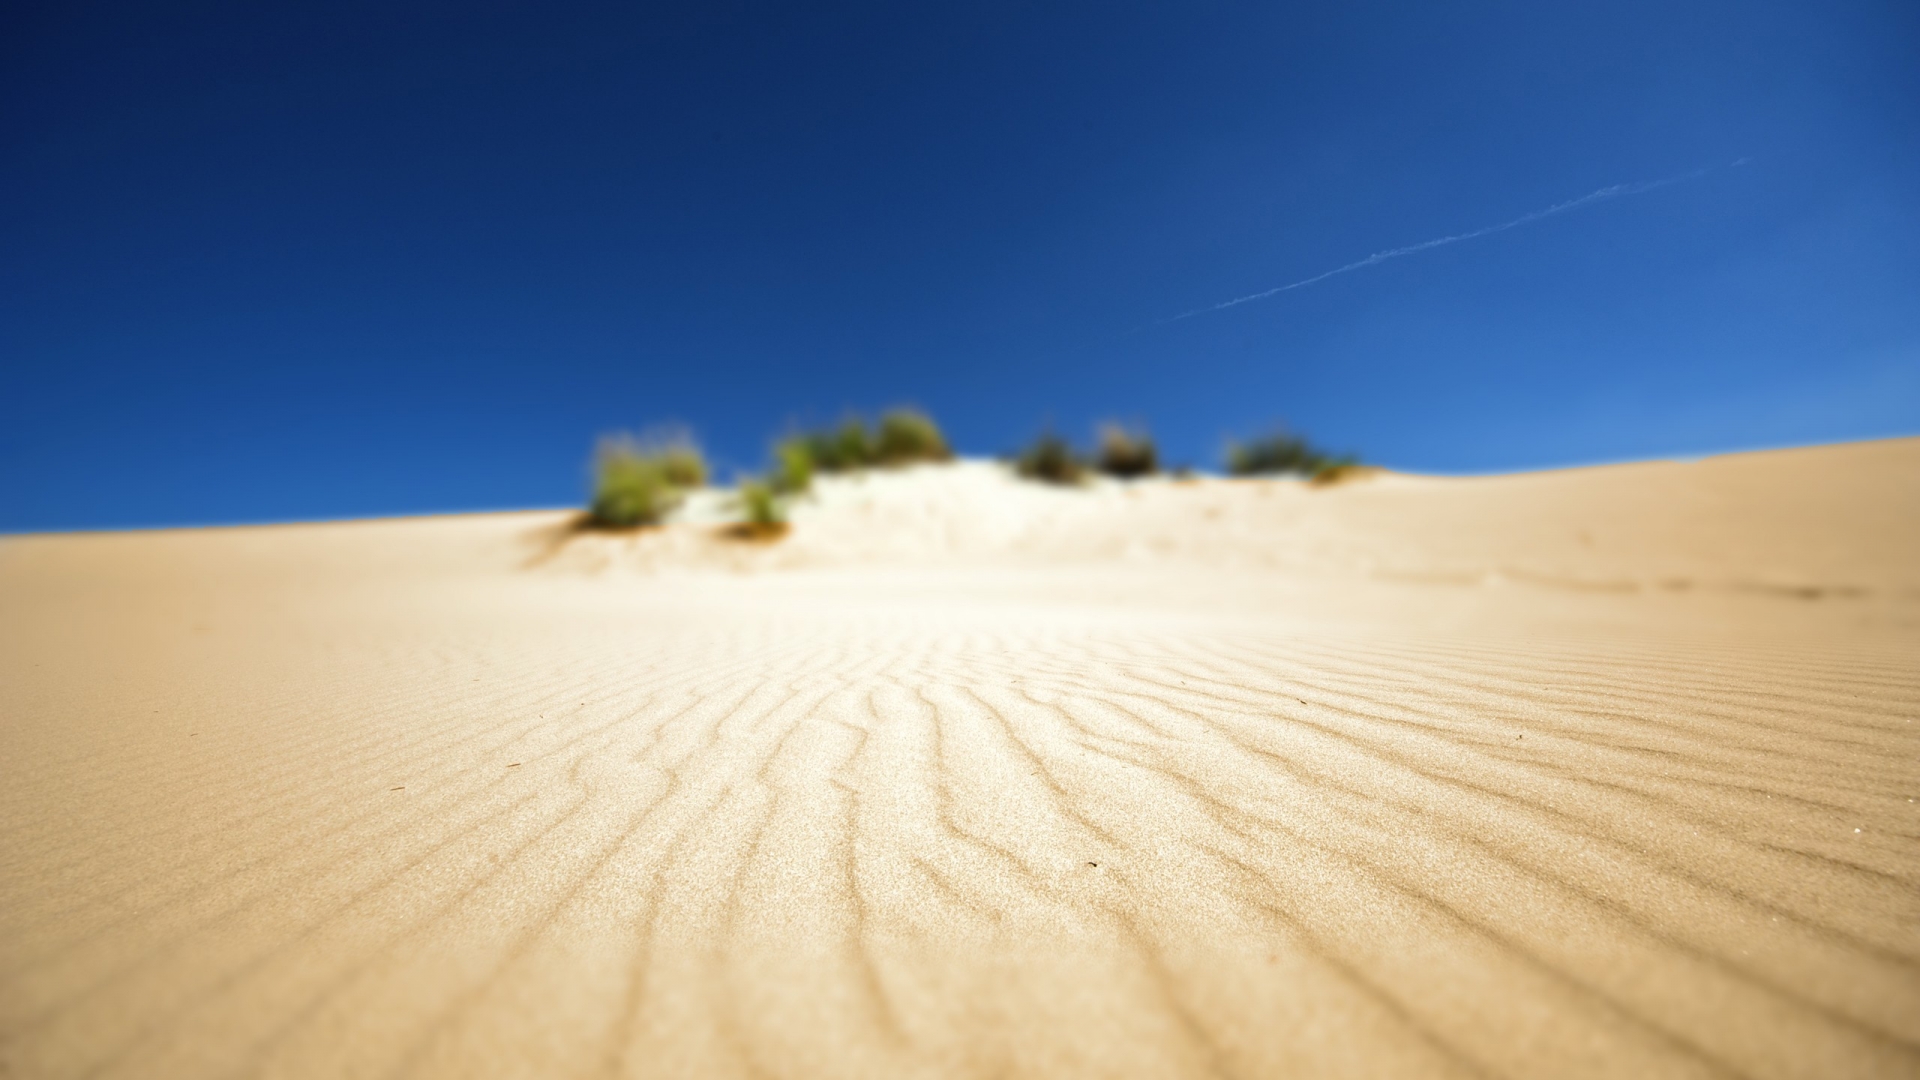 Something in Sand for 1920 x 1080 HDTV 1080p resolution